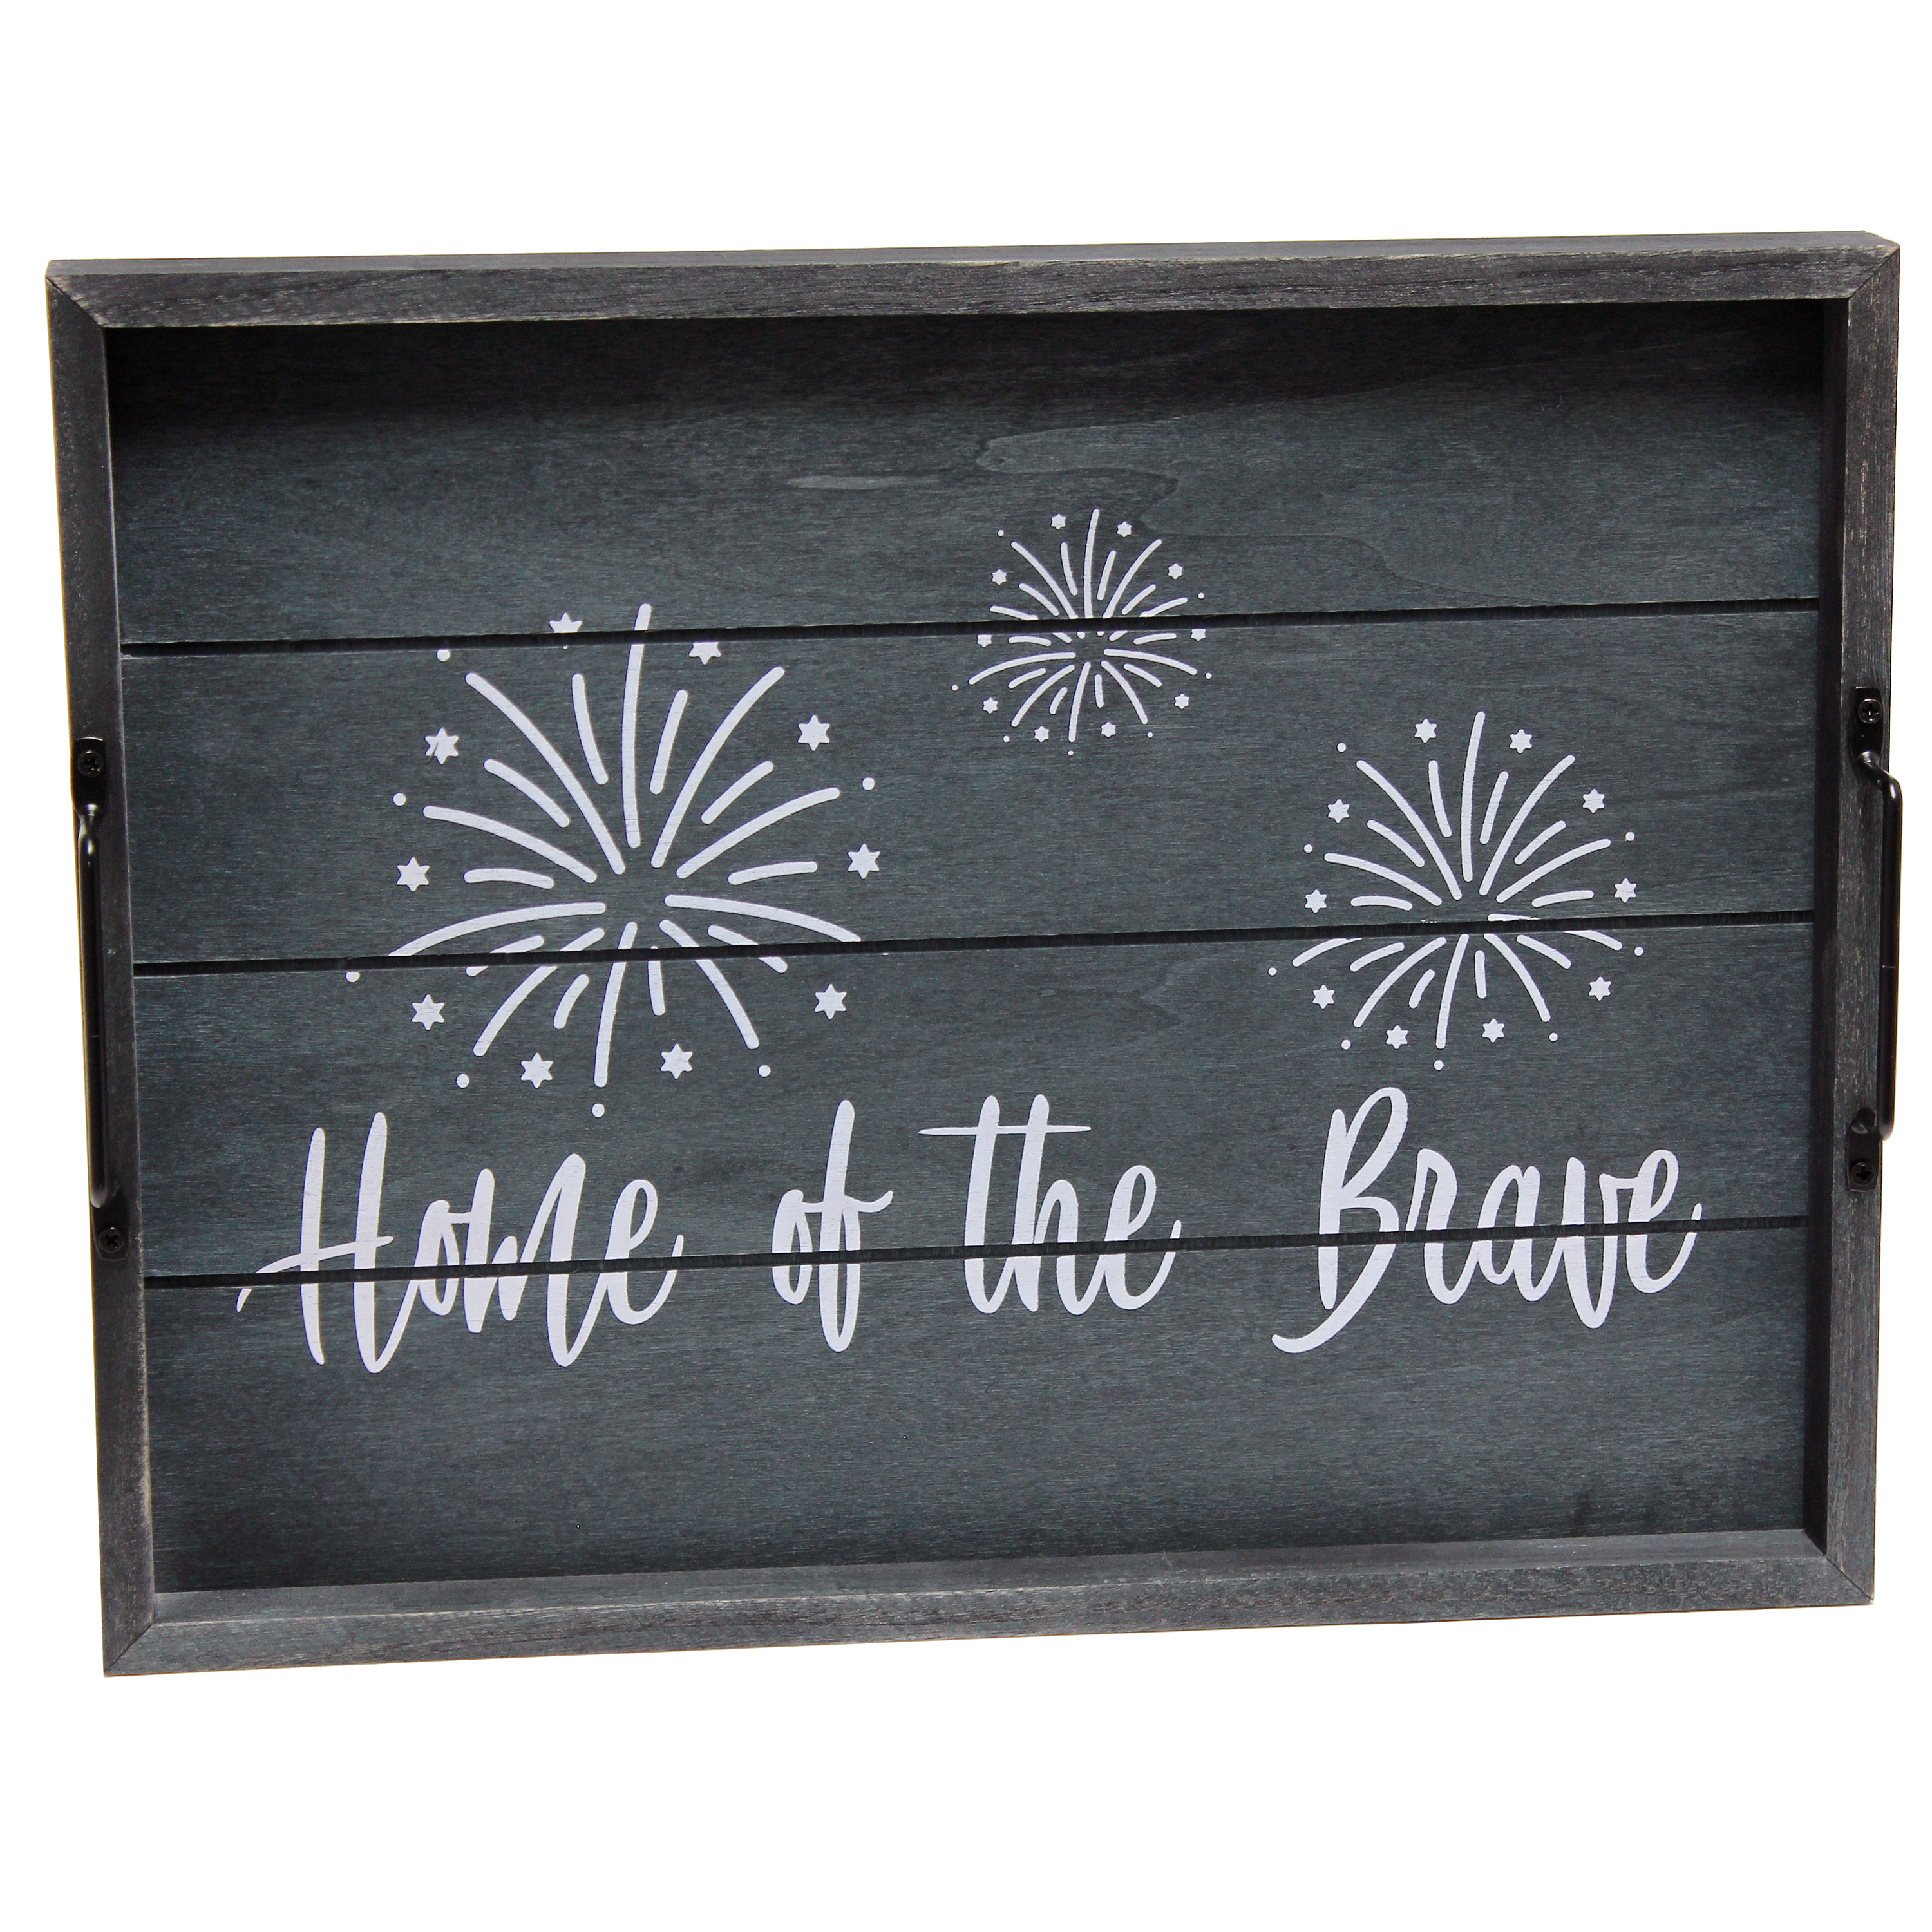 Elegant Designs Decorative Wood Serving Tray w/ Handles, 15.50" x 12", "Home of the Brave"